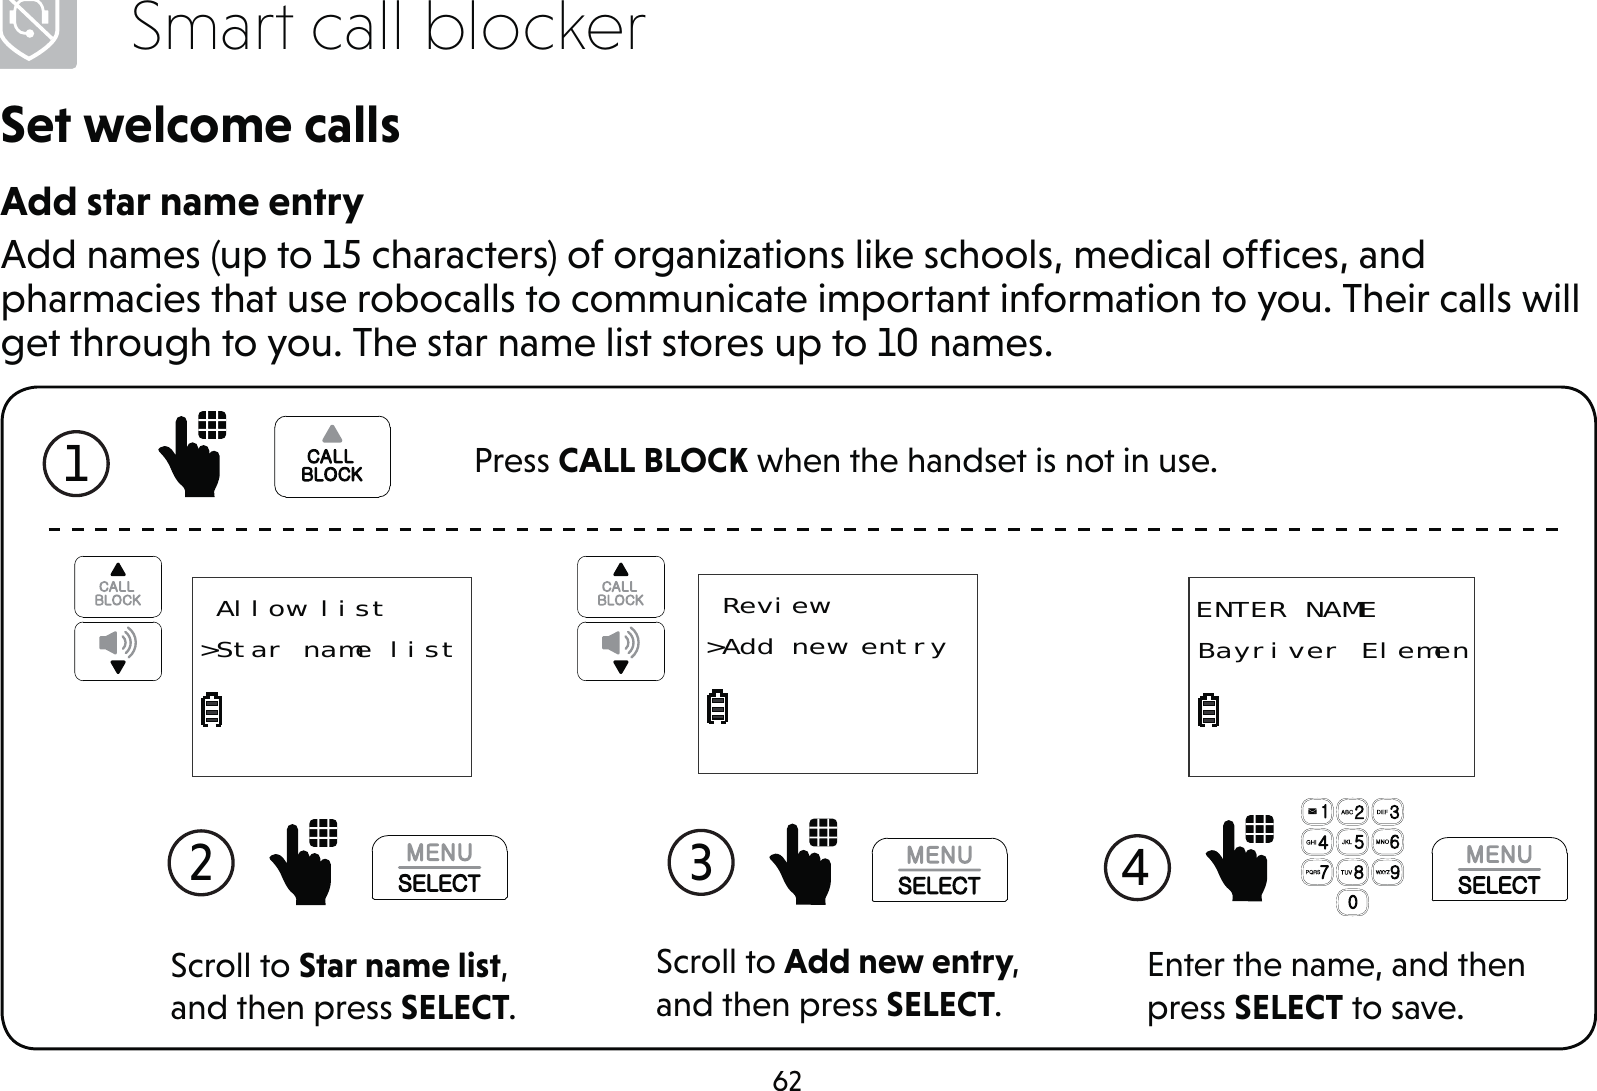 62Smart call blockerSet welcome callsAdd star name entryAdd names (up to 15 characters) of organizations like schools, medical ofﬁces, and pharmacies that use robocalls to communicate important information to you. Their calls will get through to you. The star name list stores up to 10 names.Scroll to Add new entry, and then press SELECT.3  Review&gt;Add new entryScroll to Star name list, and then press SELECT.2  Allow list&gt;Star name list ENTER NAMEBayriver ElemenEnter the name, and then press SELECT to save.4 1  Press CALL BLOCK when the handset is not in use.